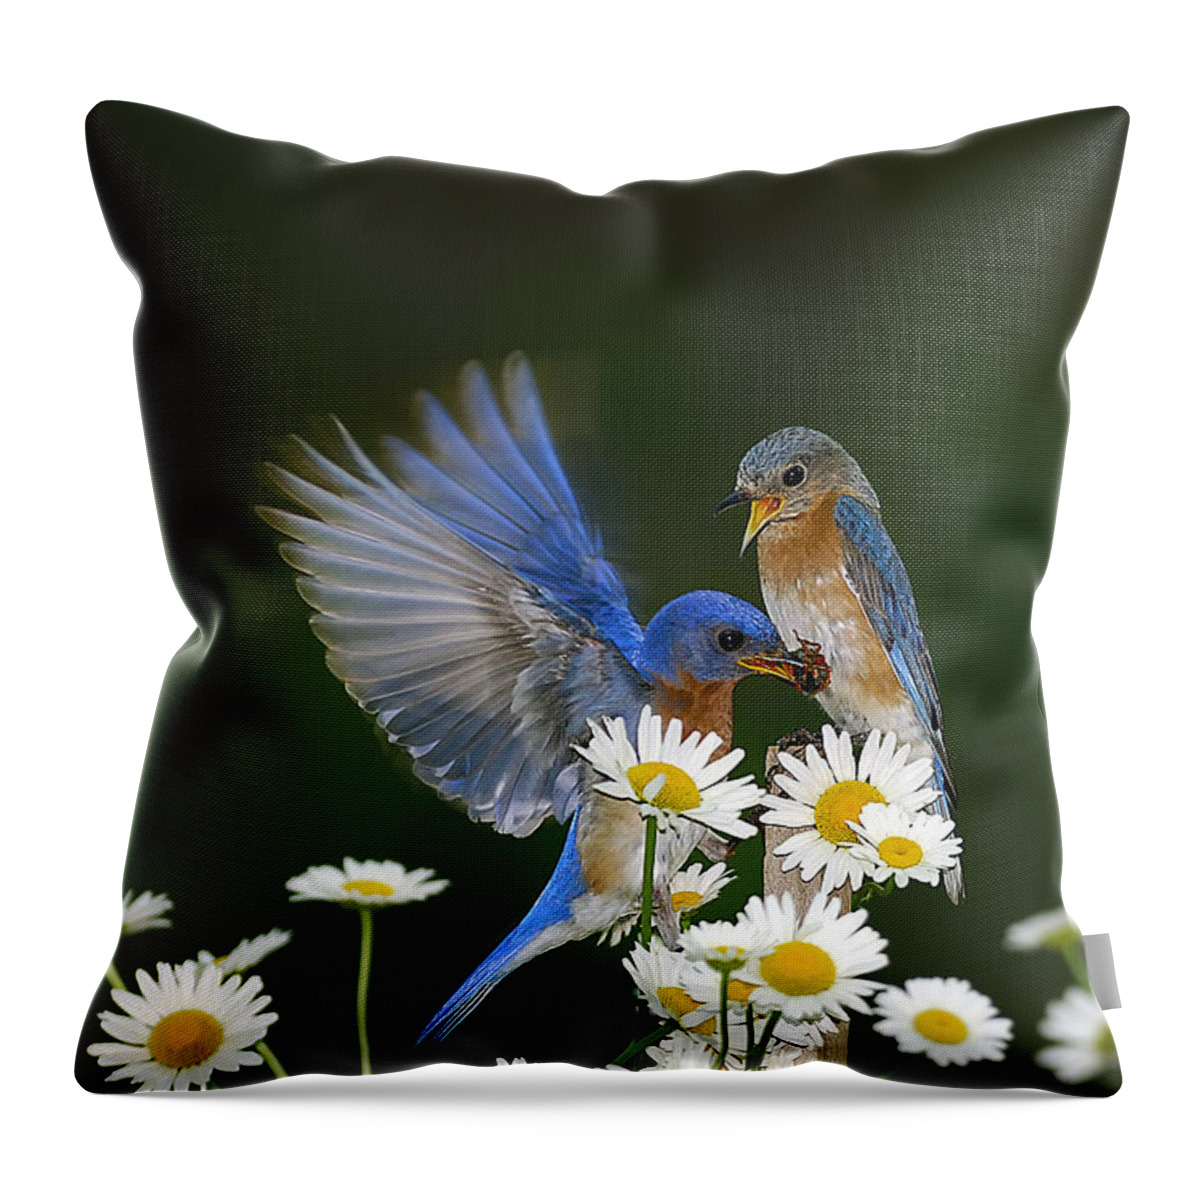 Bluebirds Daisies Throw Pillow featuring the photograph Bluebirds Picnicking In The Daisies by Randall Branham